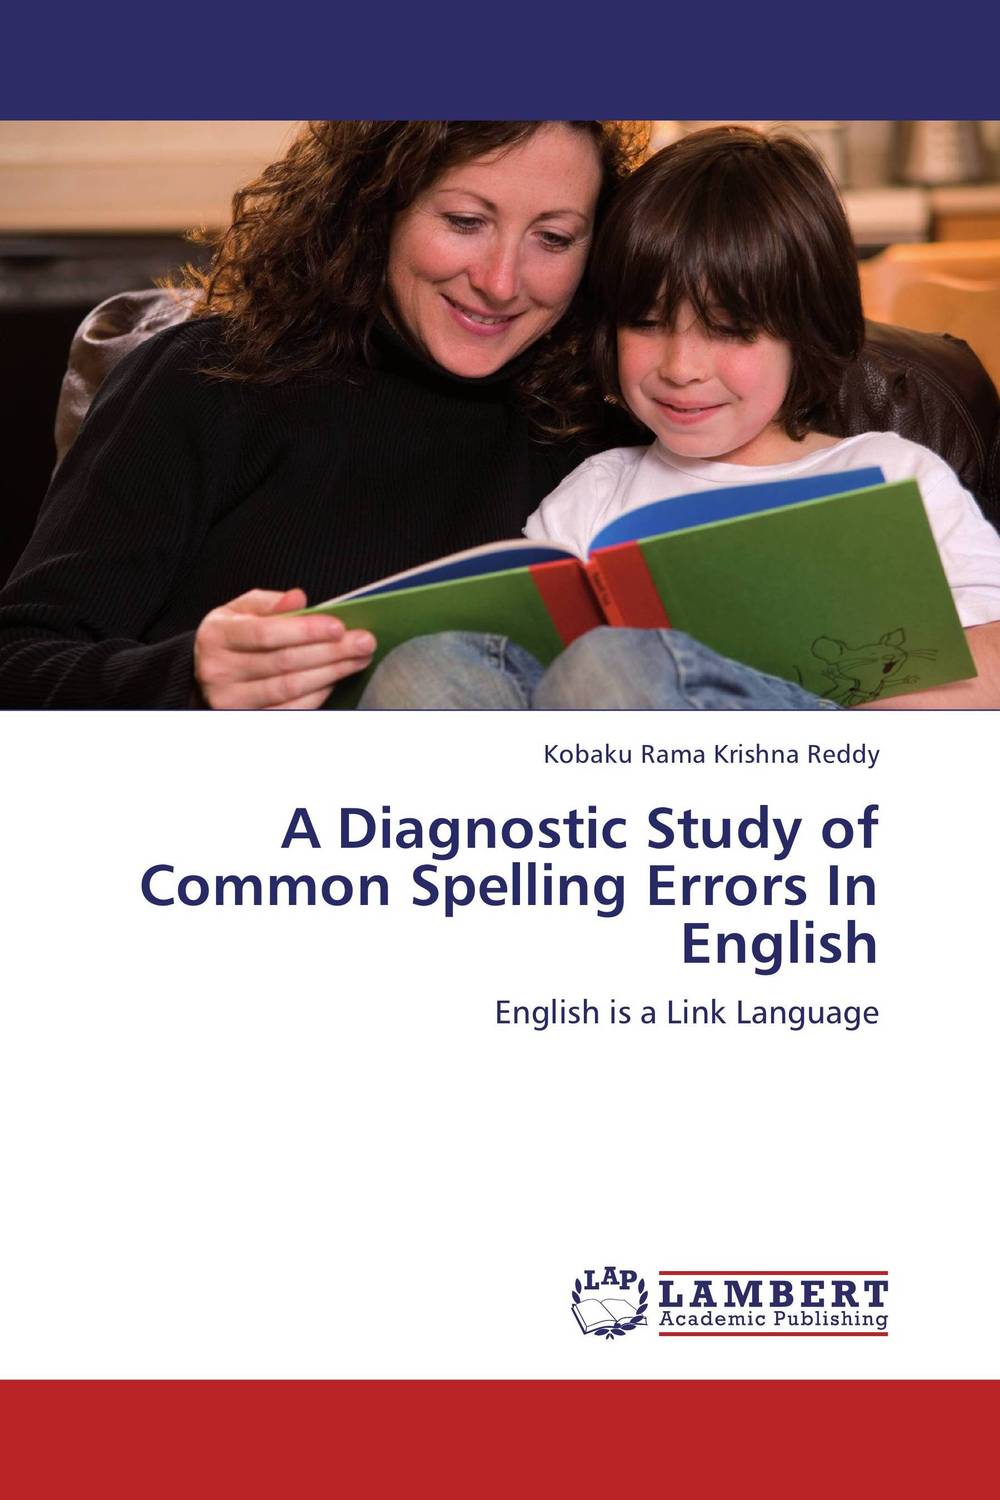 A Diagnostic Study of Common Spelling Errors In English